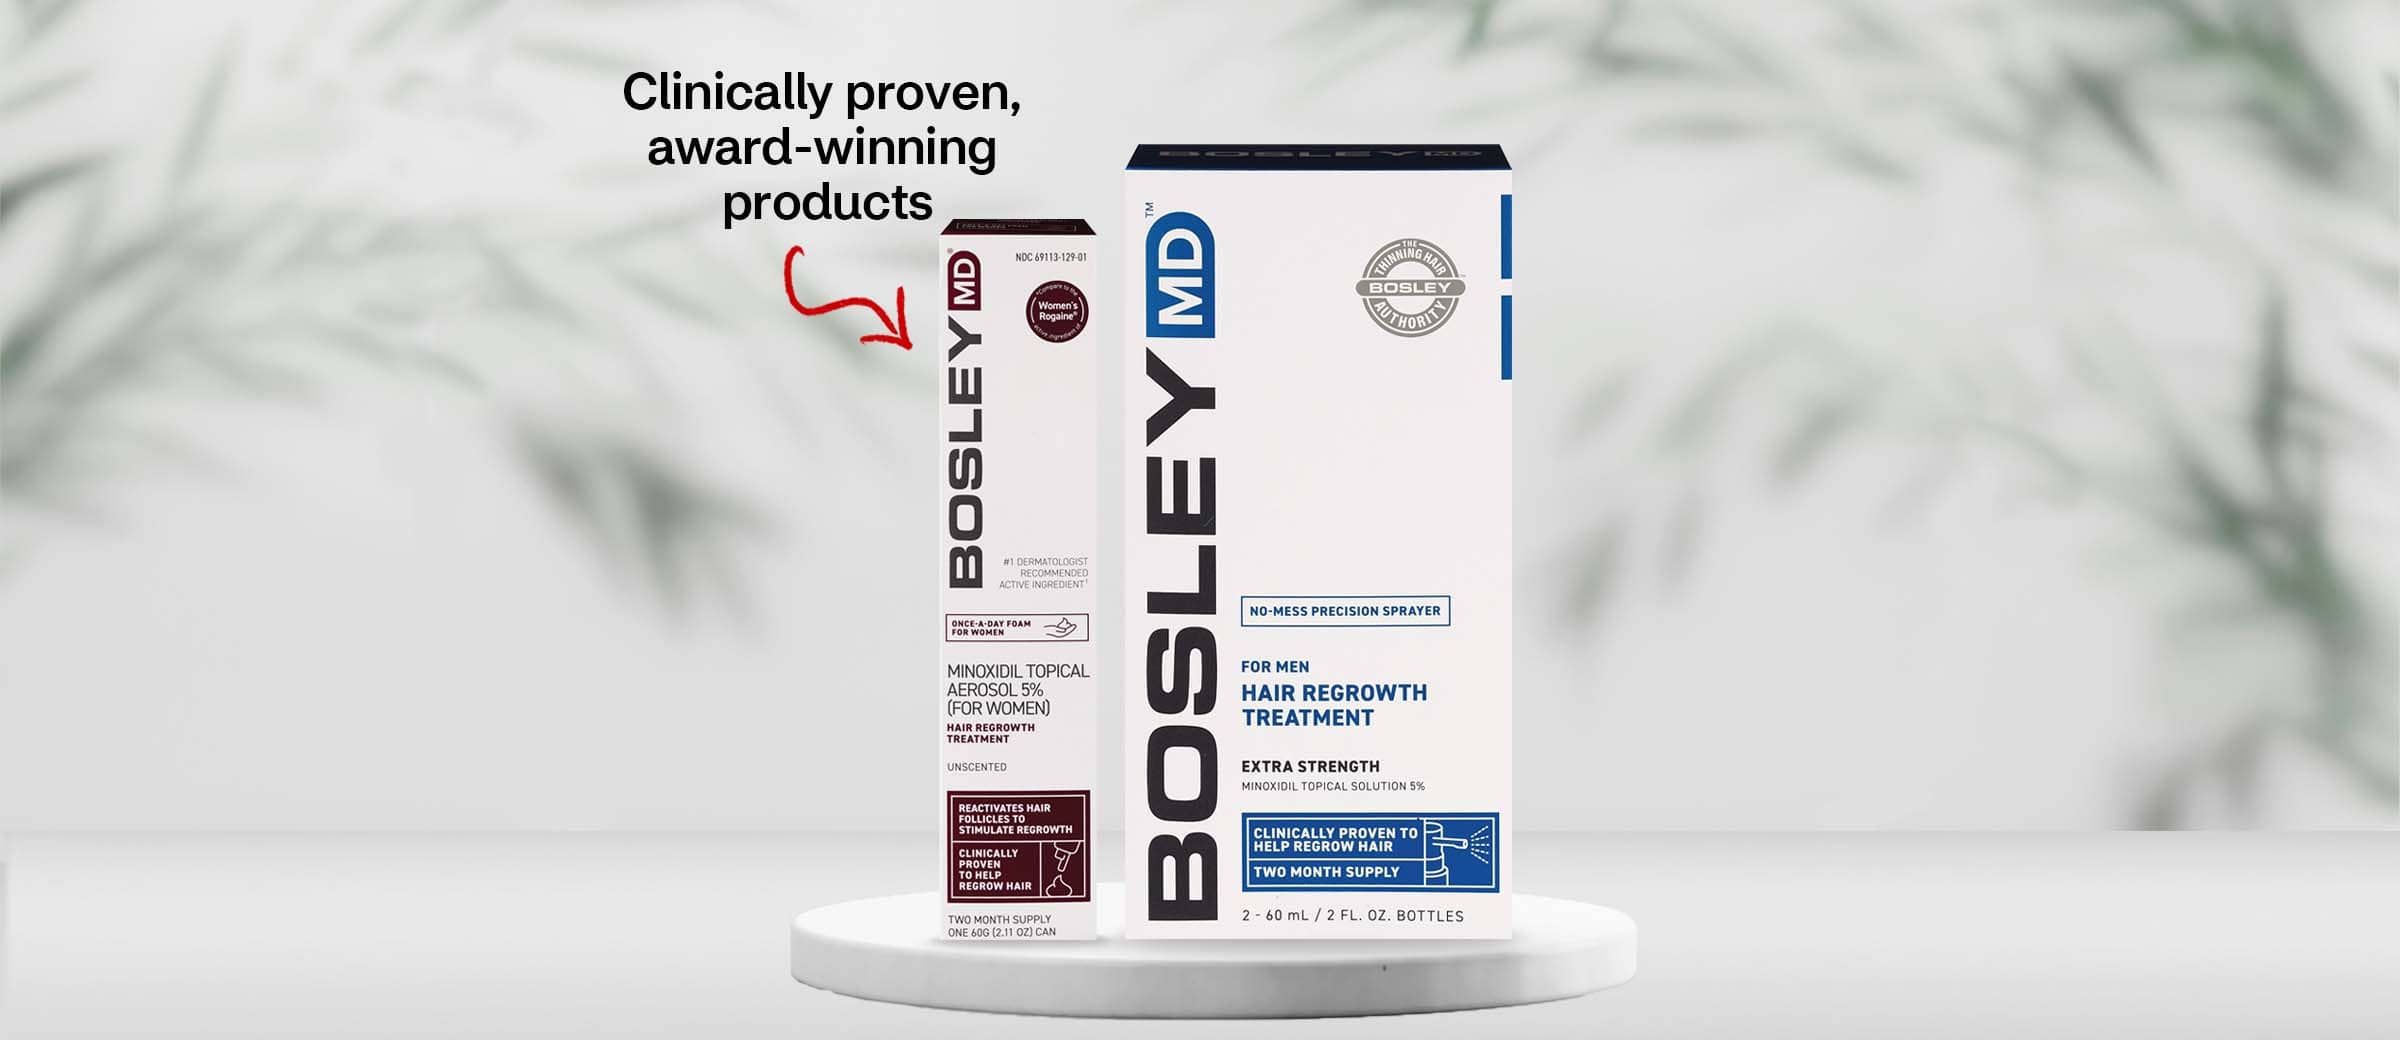 Clinically proven, award-winning products, BosleyMD hair regrowth products